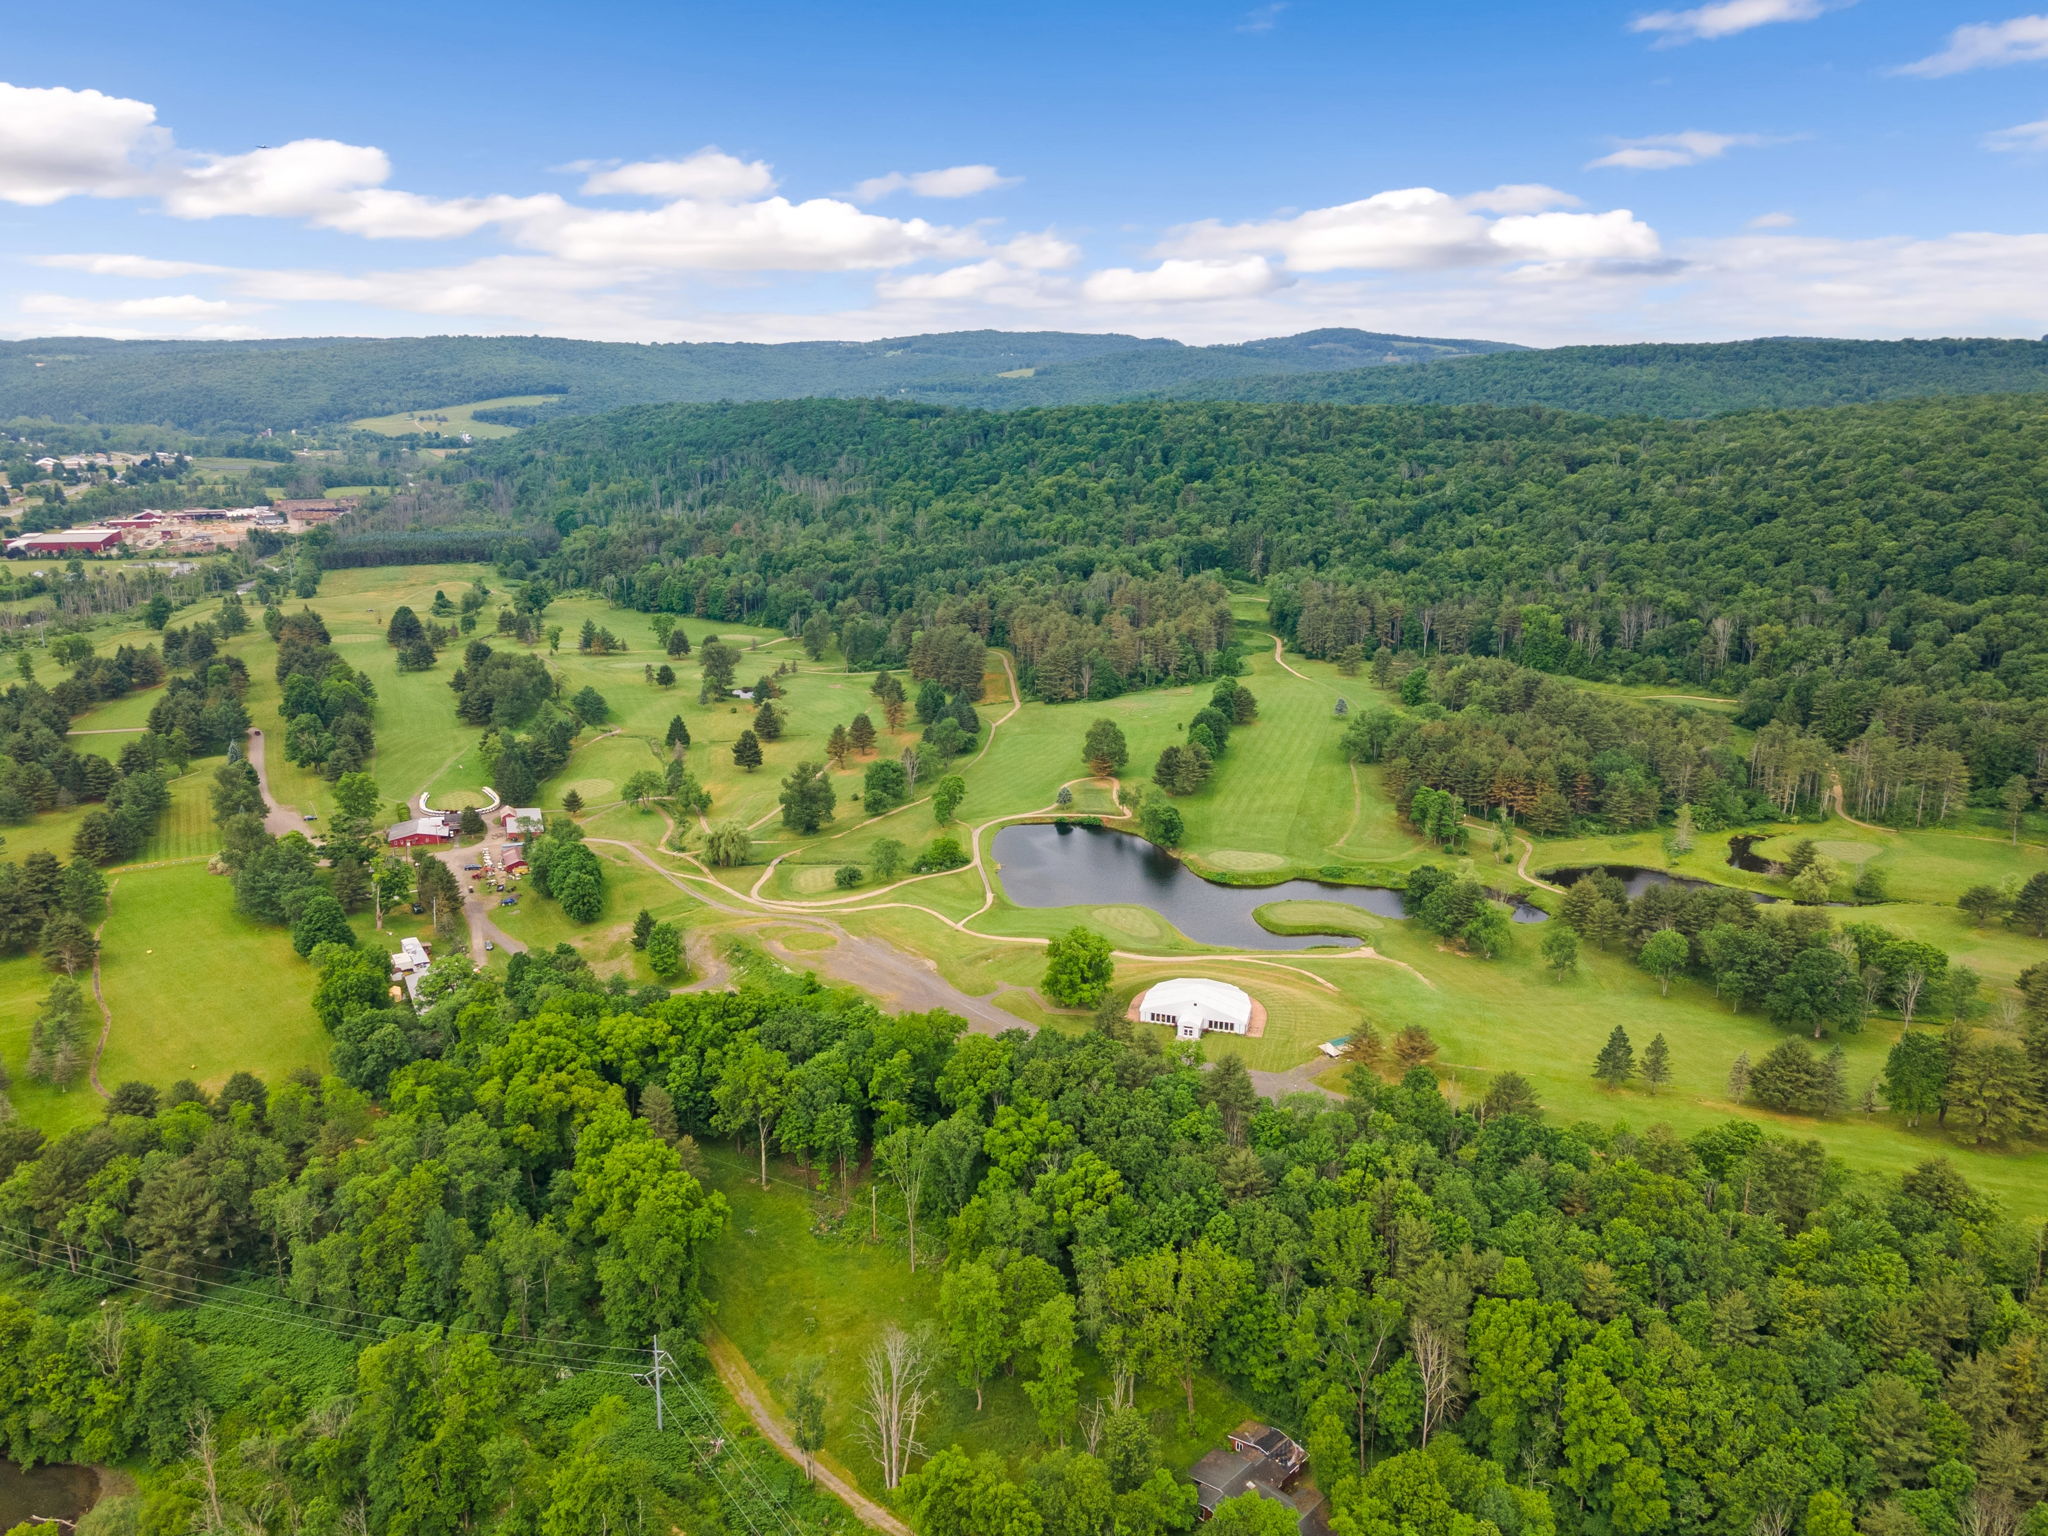 18 Hole Golf Course with 318 acres Investment Opportunity in the Southern Tier Region of New York